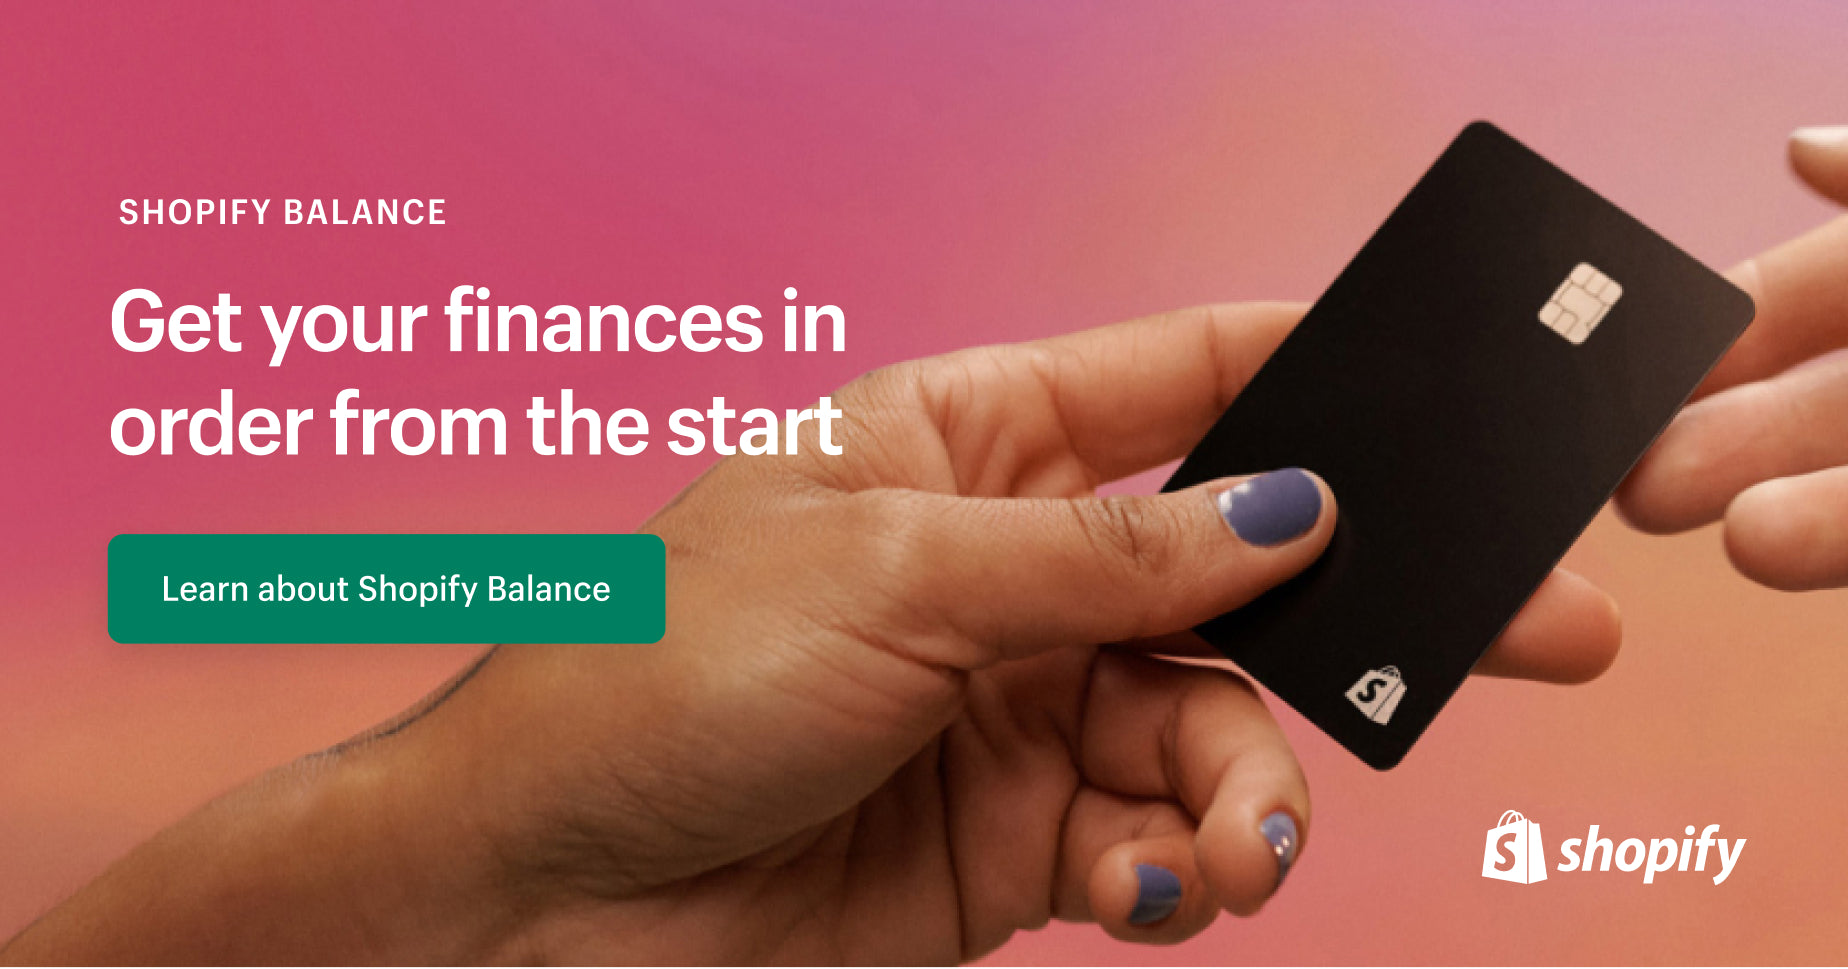 Get your finances in order with Shopify Balance